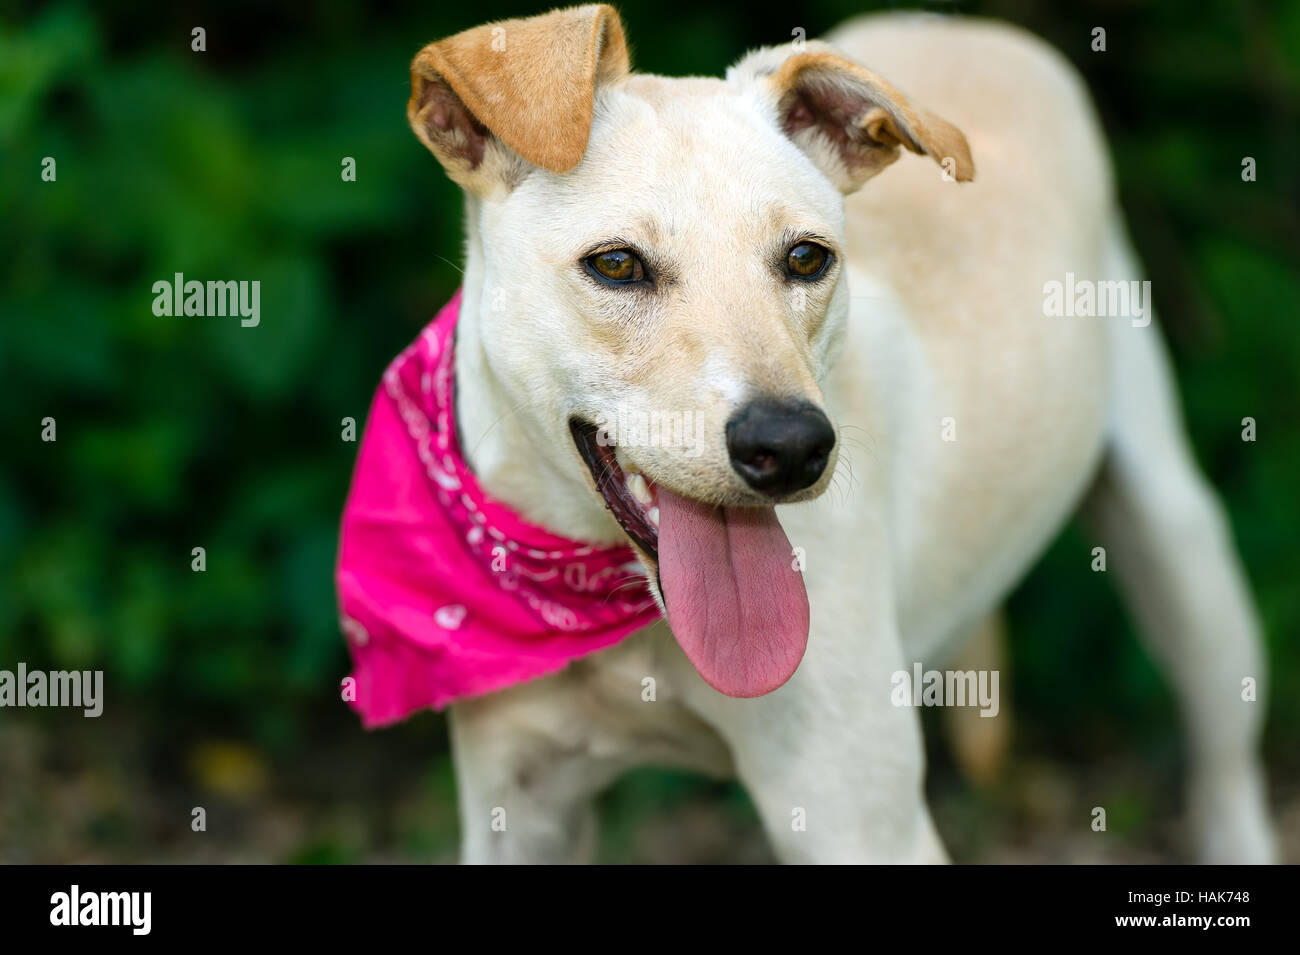 Dog happy face is a beautiful white dog looking very happy and excited to be outdoors. Stock Photo